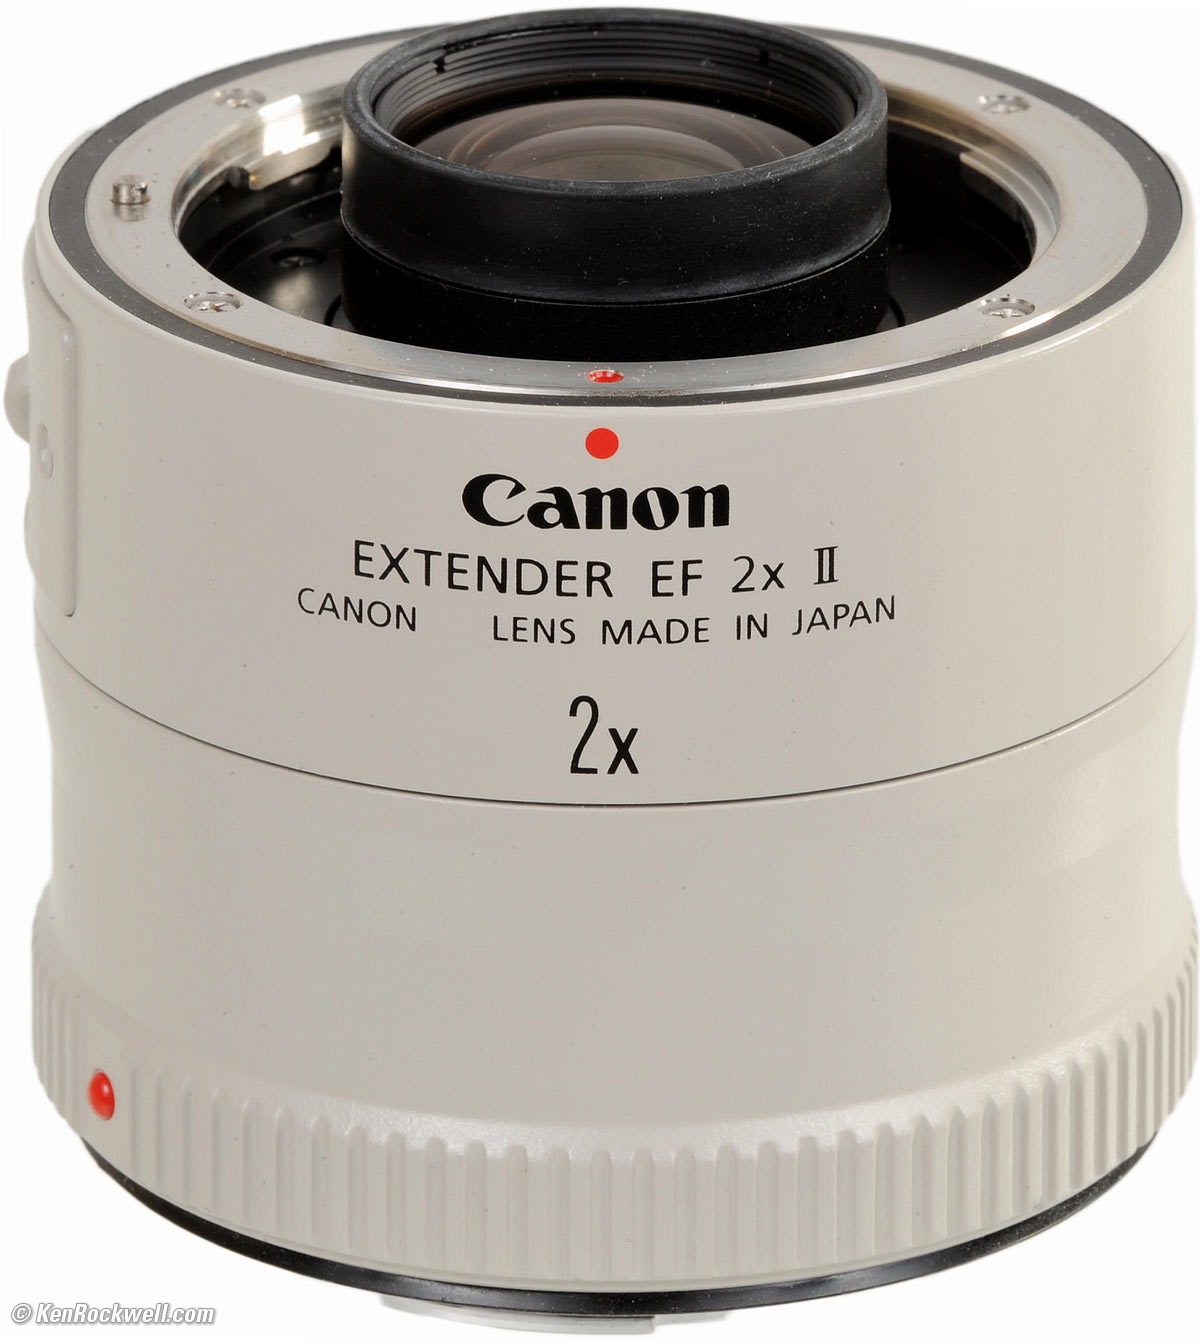 Canon Extender 2x II Review